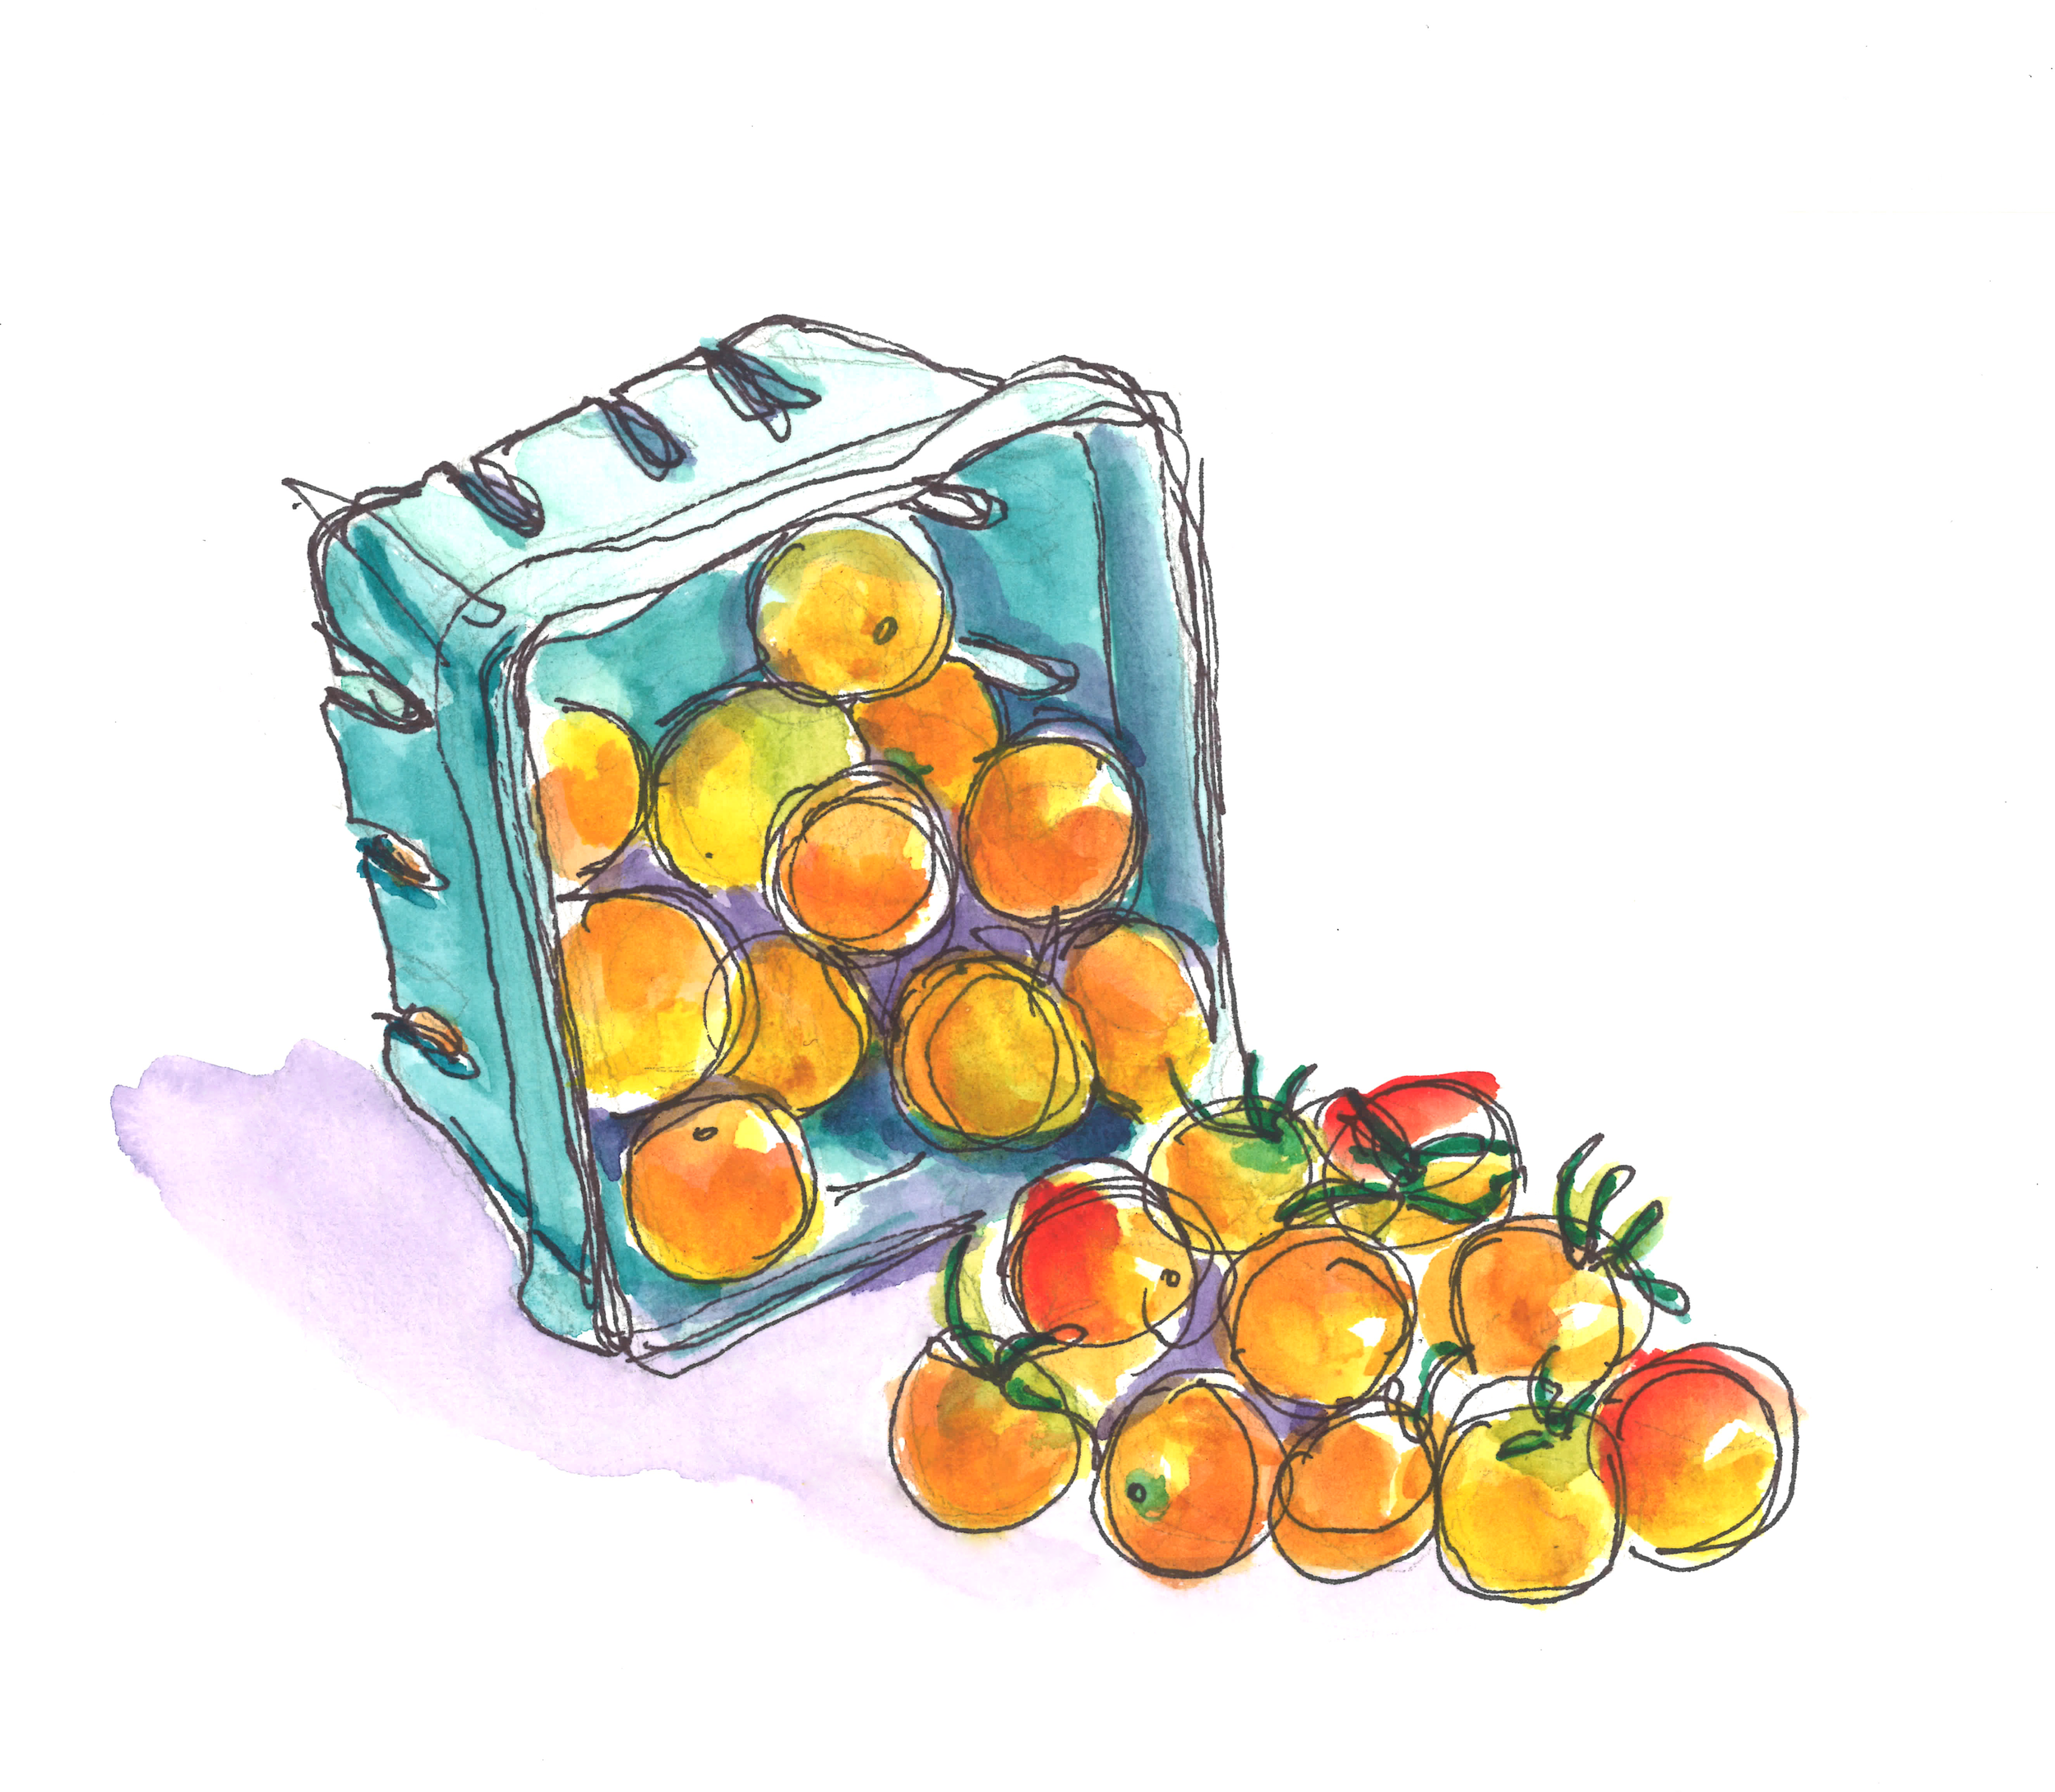  “Sungold Cherry Tomatoes” by Drew Vallero, Stanford '22 